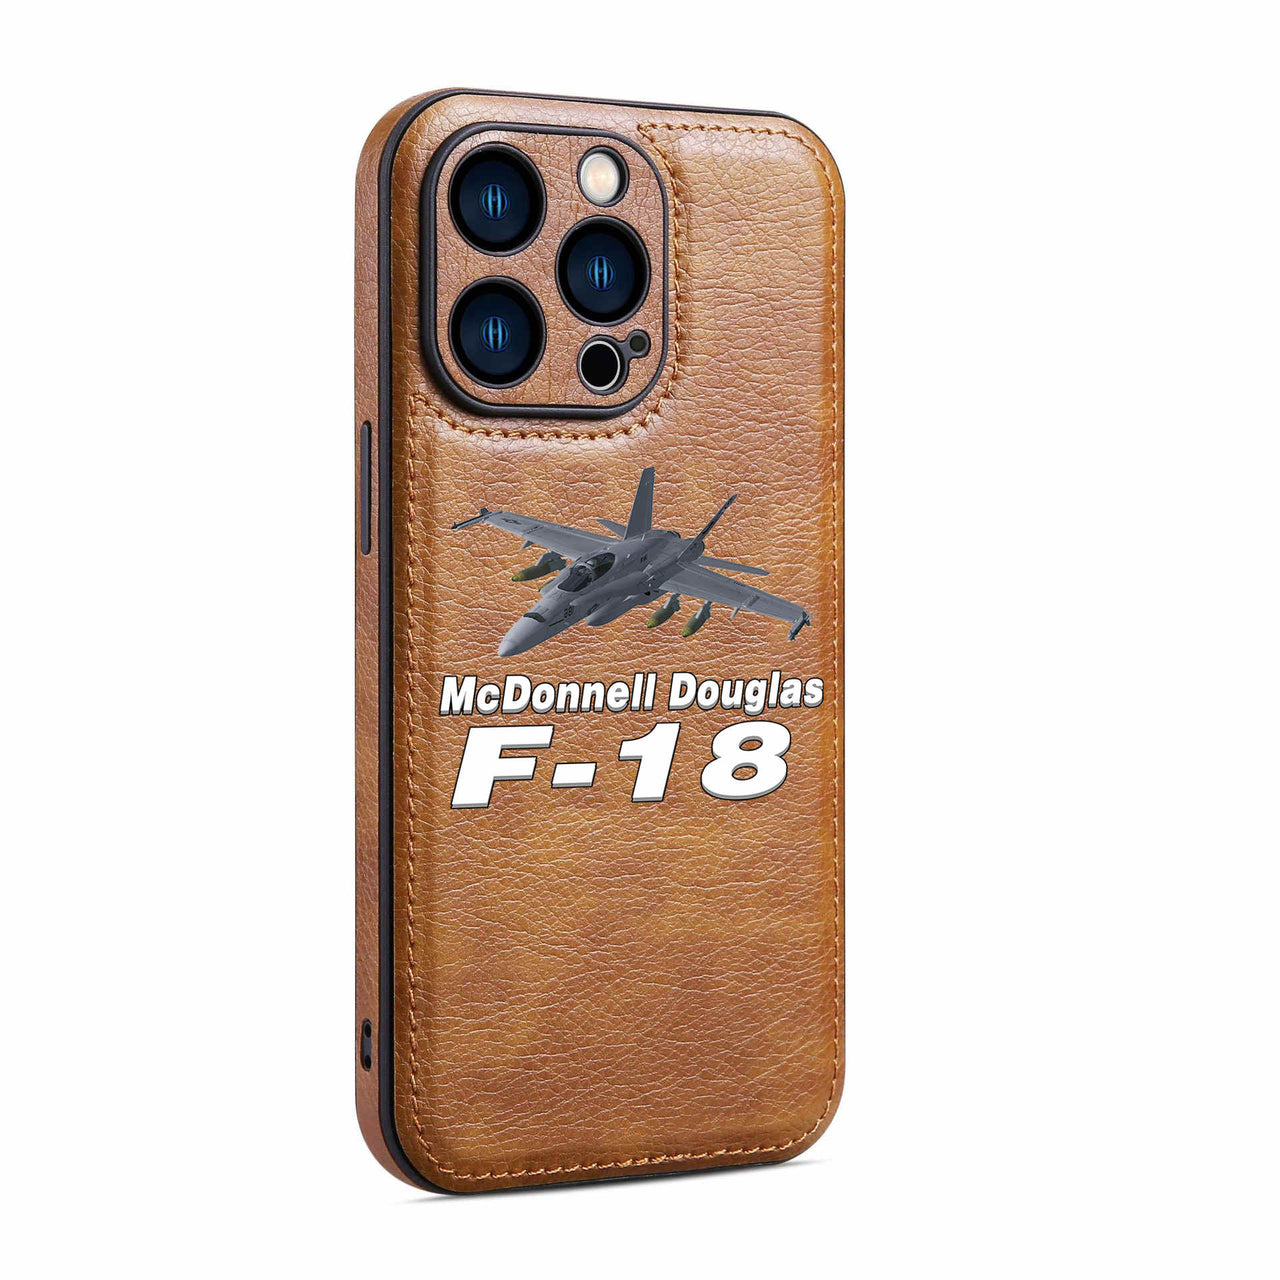 The McDonnell Douglas F18 Designed Leather iPhone Cases